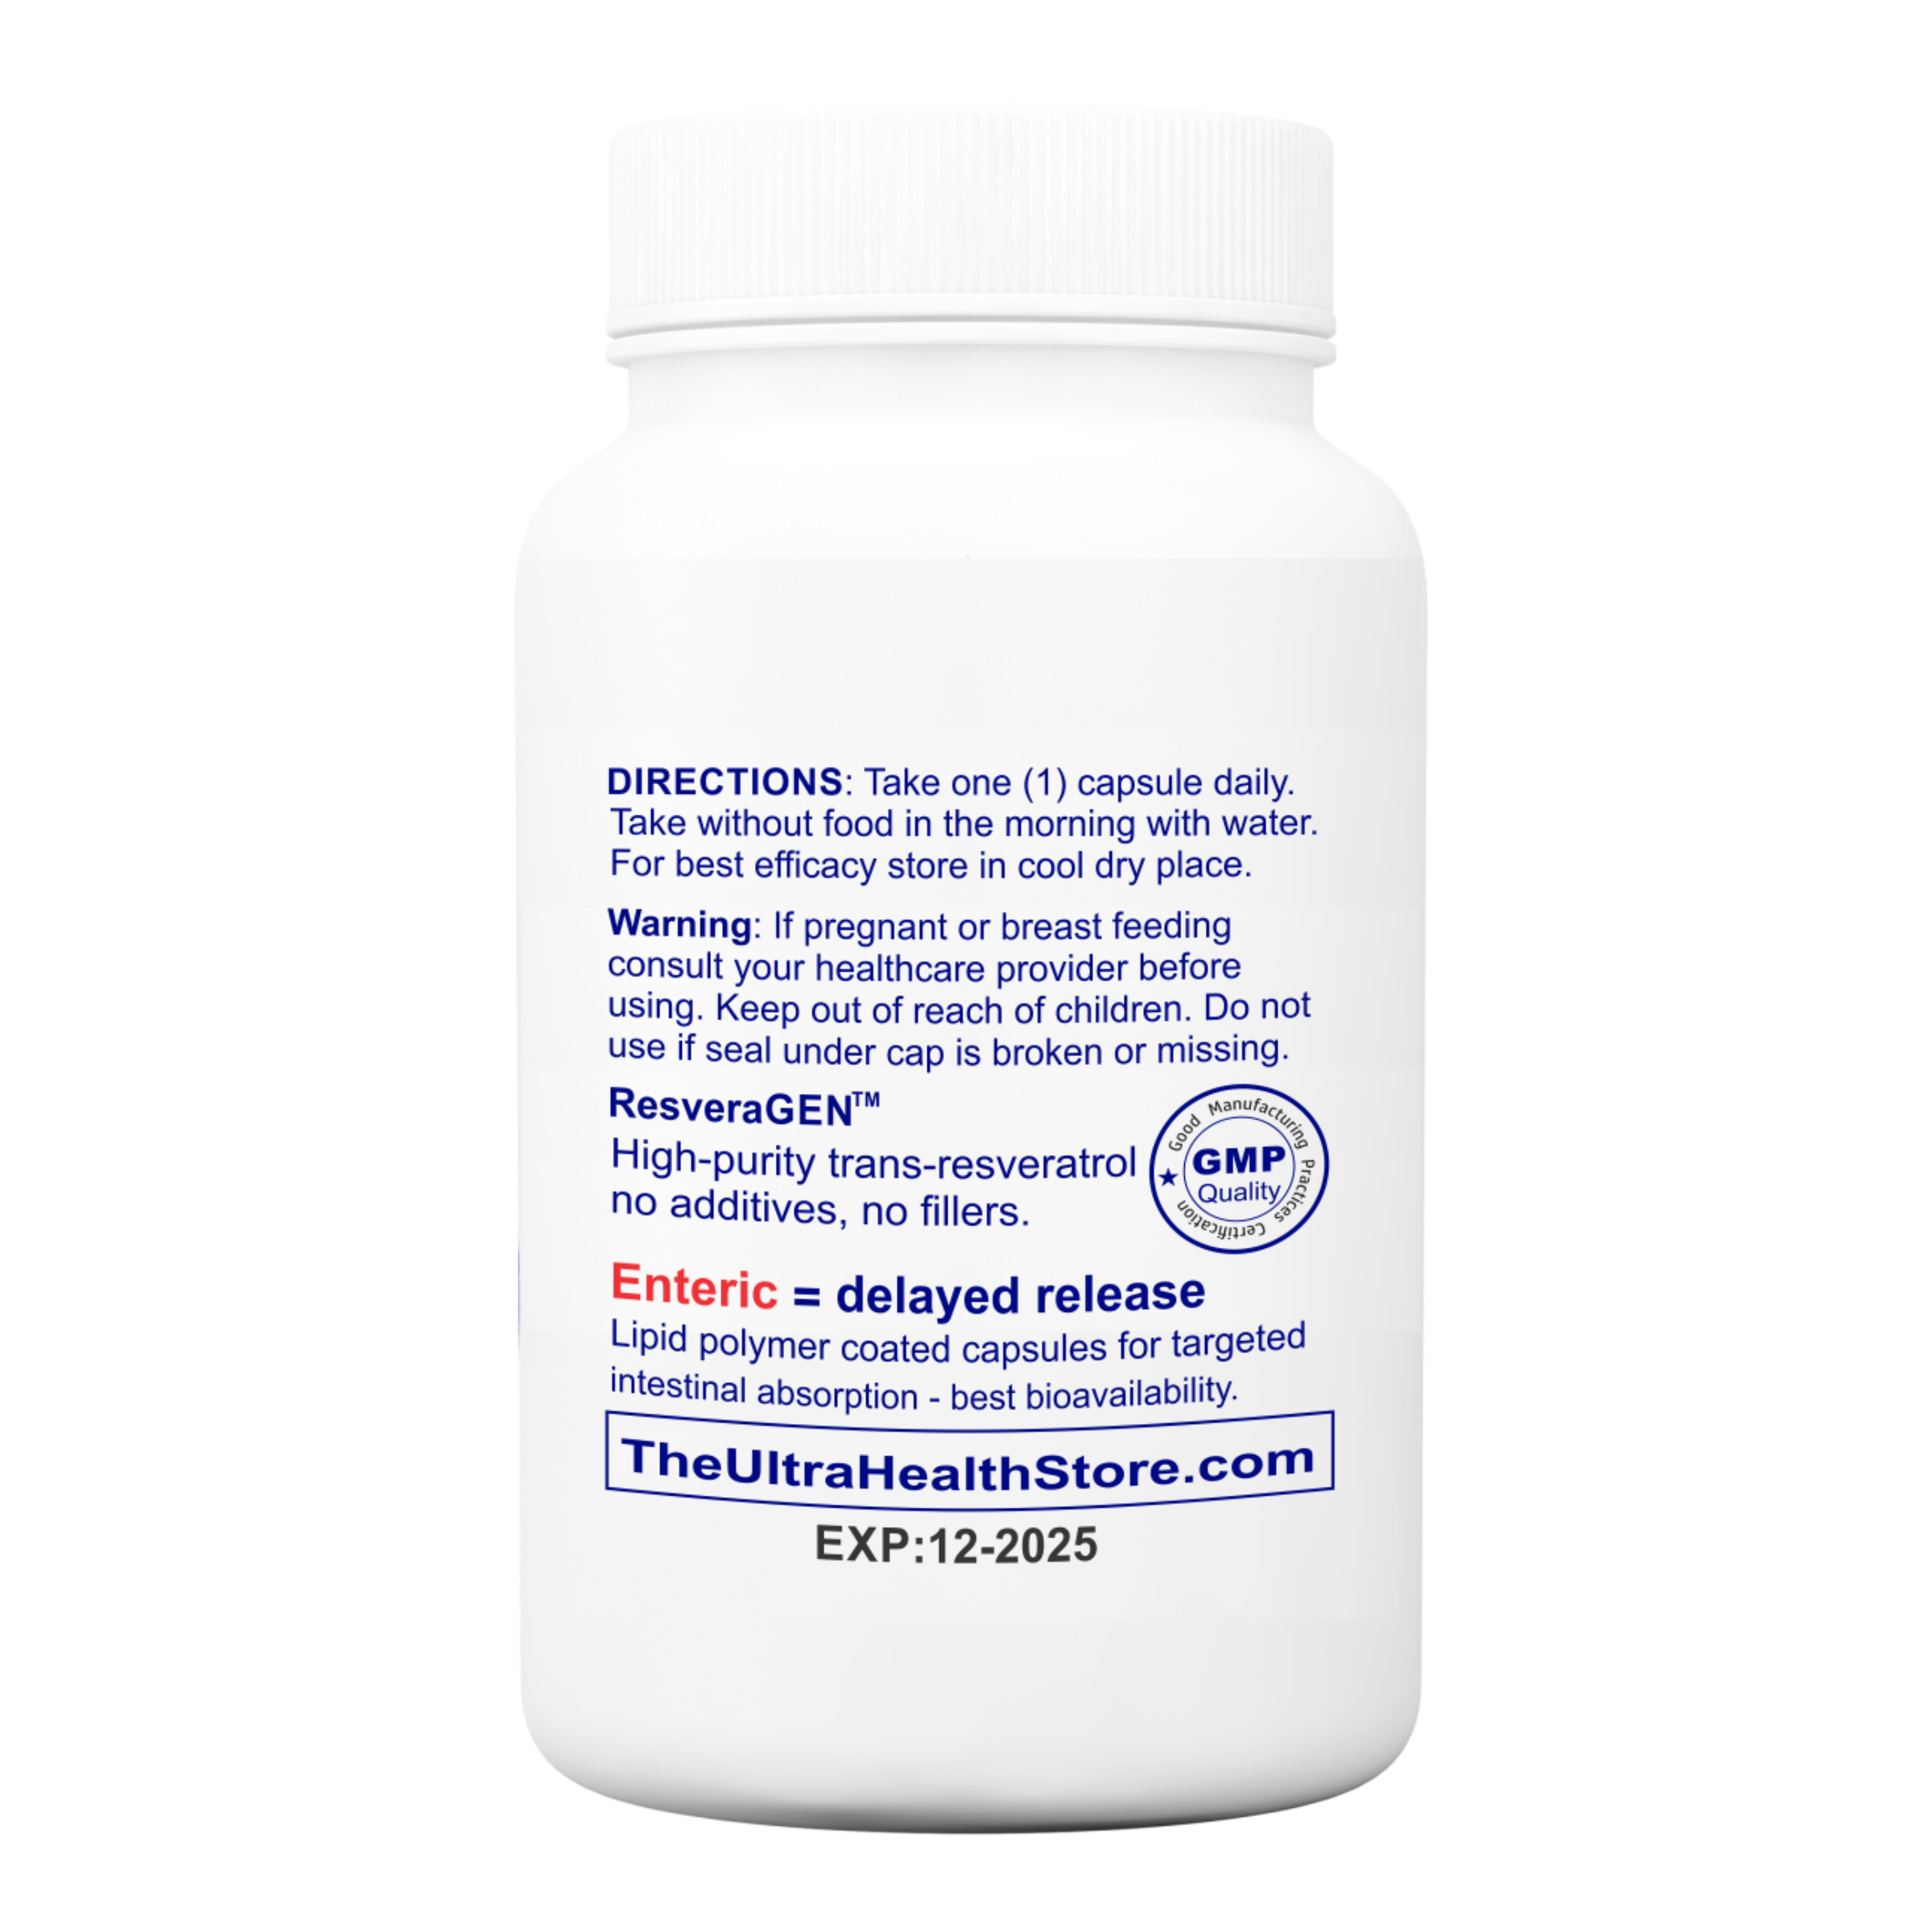 ResveraGEN™ 60 ENTERIC (Resveratrol): Ultra-pure Pharmaceutical Grade 300mg (Resveratrol: CAS No. 501-36-0), 60-Day Supply, not extracted but synthesized, no additives